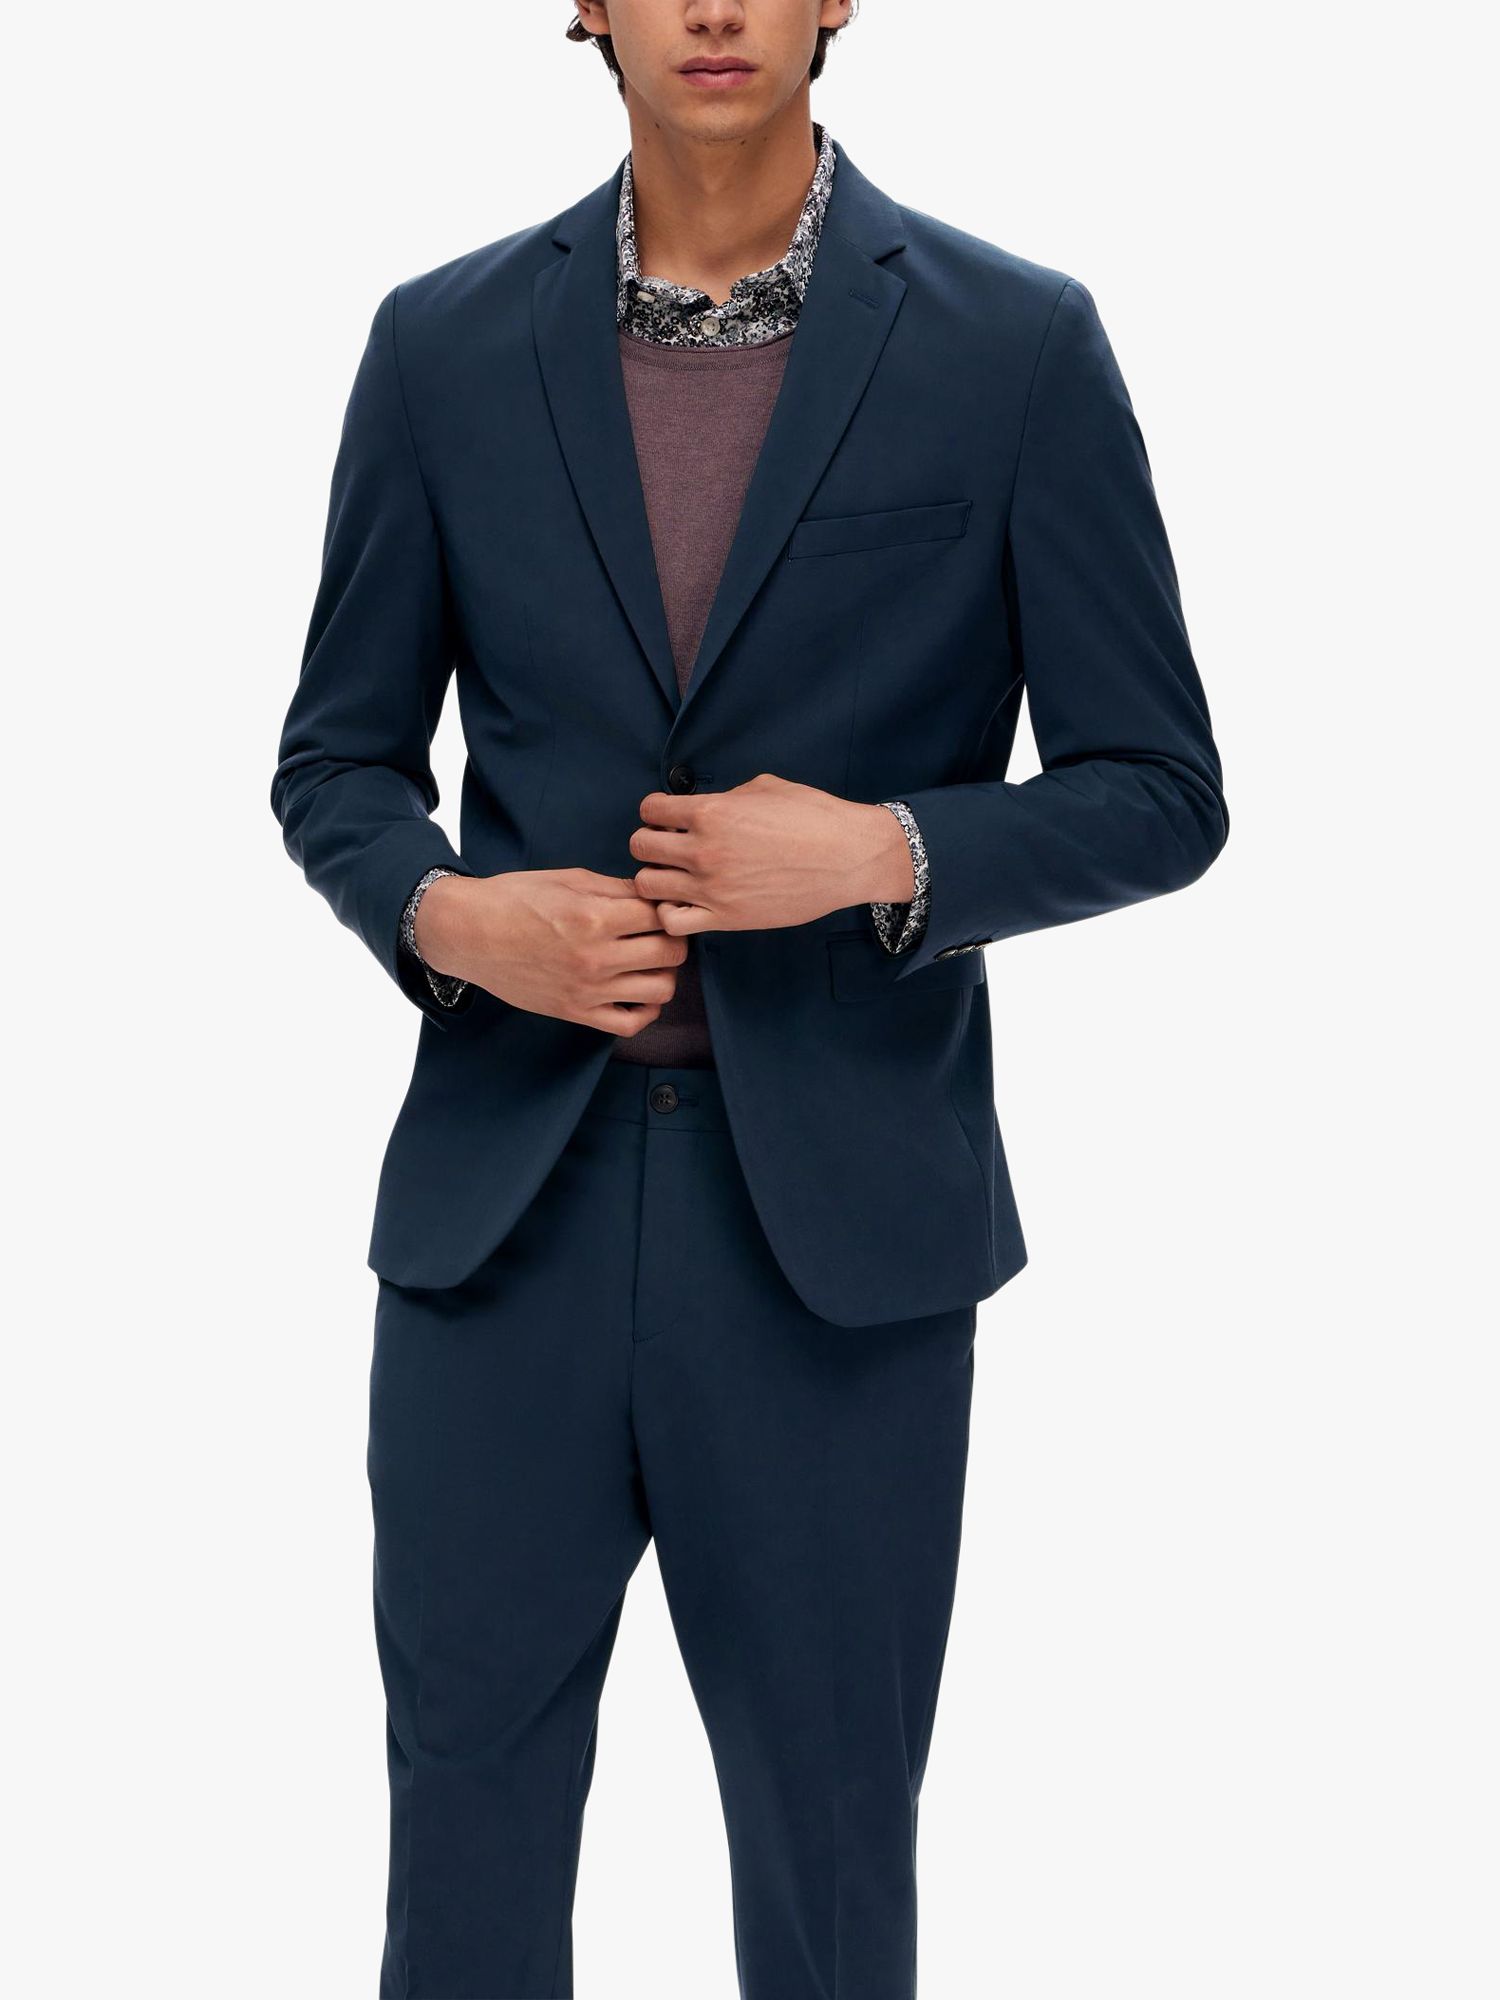 SELECTED HOMME Liam Suit Blazer, Navy at John Lewis & Partners